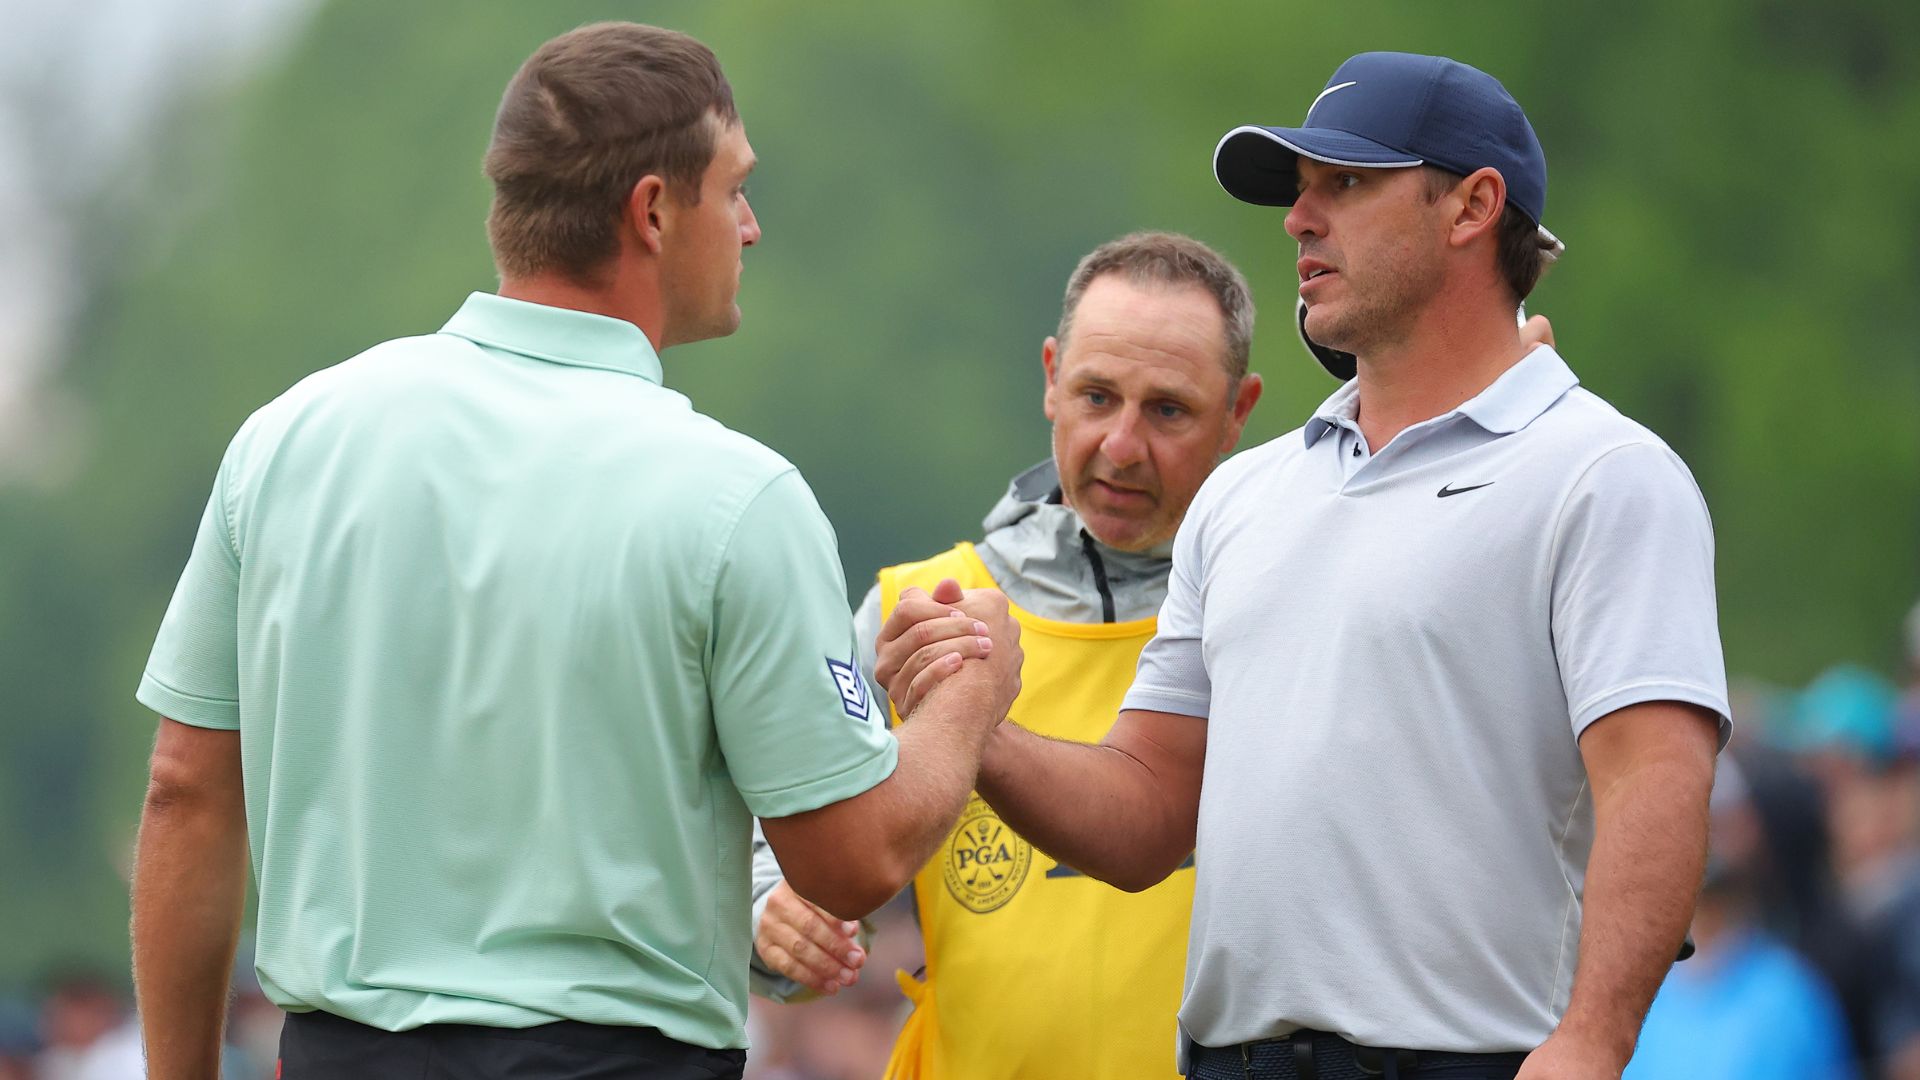 A rivalry lost to LIV: Brooks vs. Bryson isn’t the fireworks show it used to be at the 2023 PGA Championship